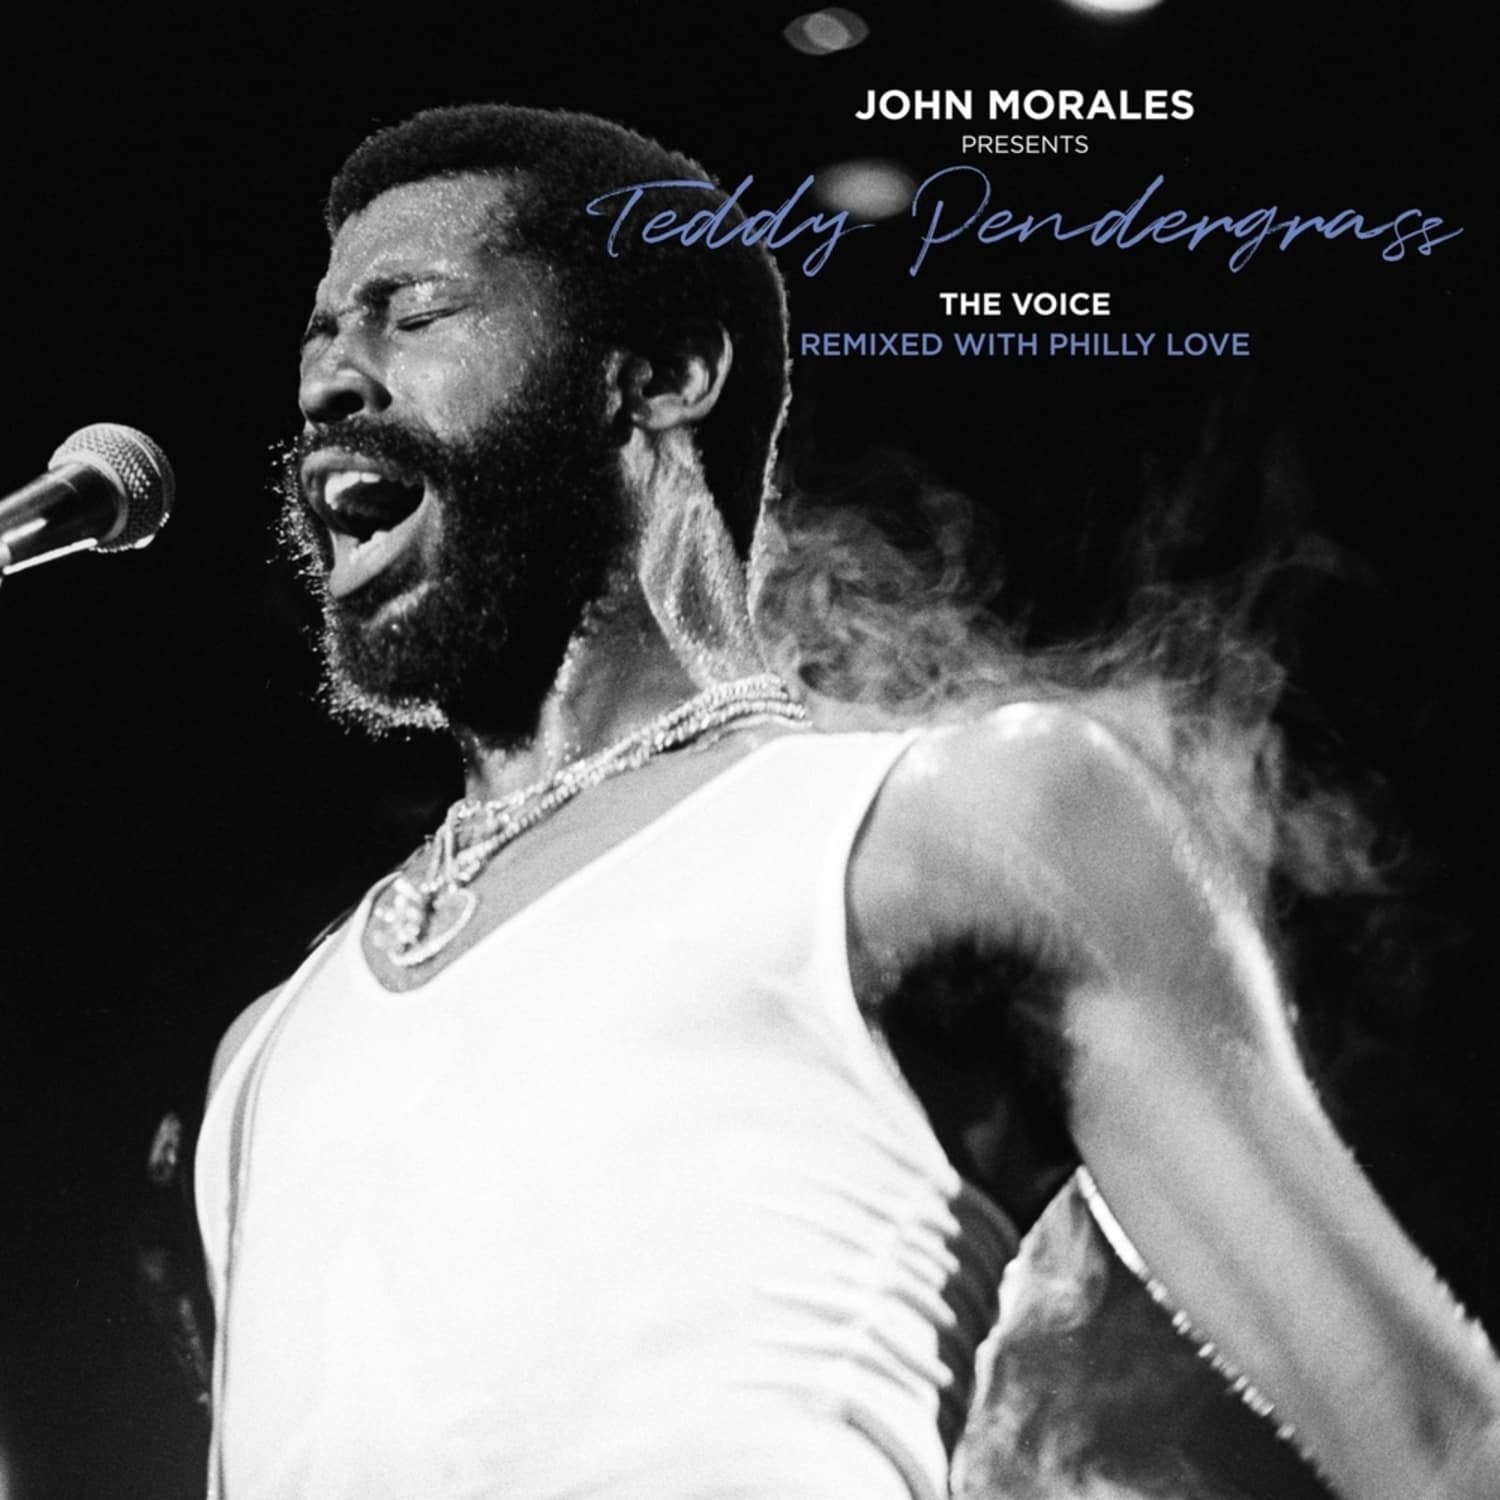 Teddy Pendergrass - JOHN MORALES PRESENTS TEDDY PENDERGRASS - THE VOICE REMIXED WITH PHILLY LOVE 